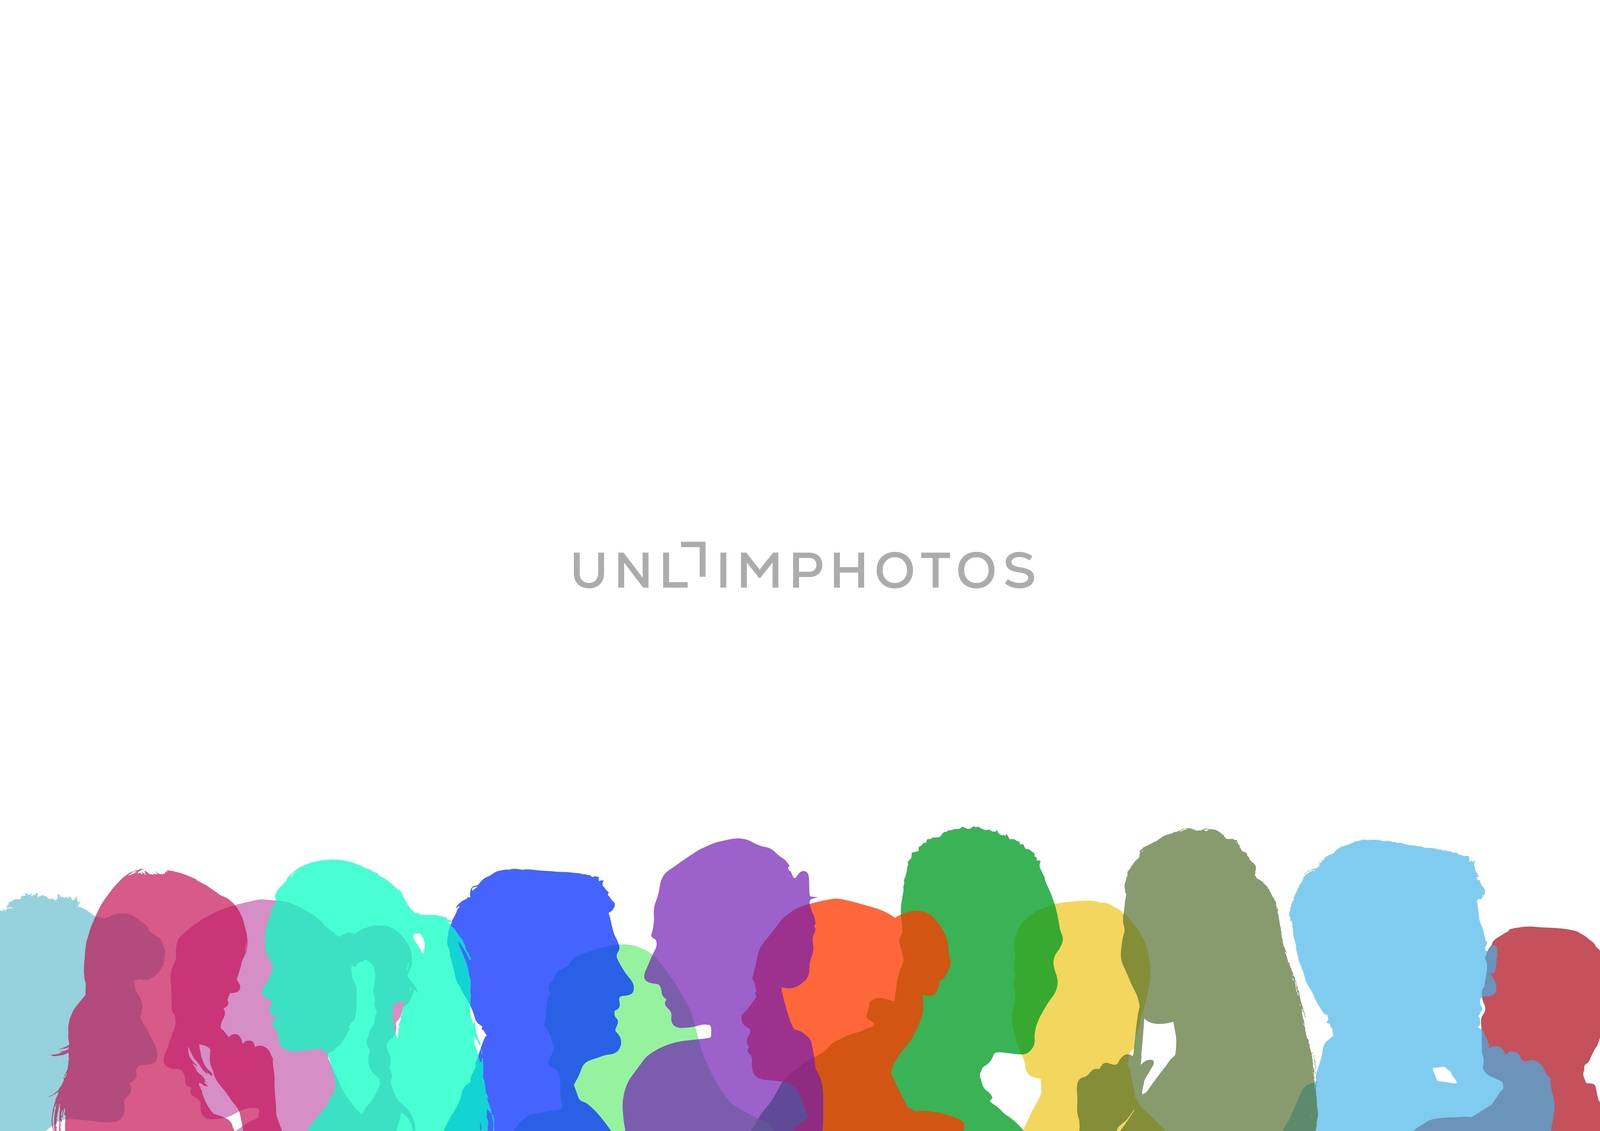 Digital composite of color silhouette of people